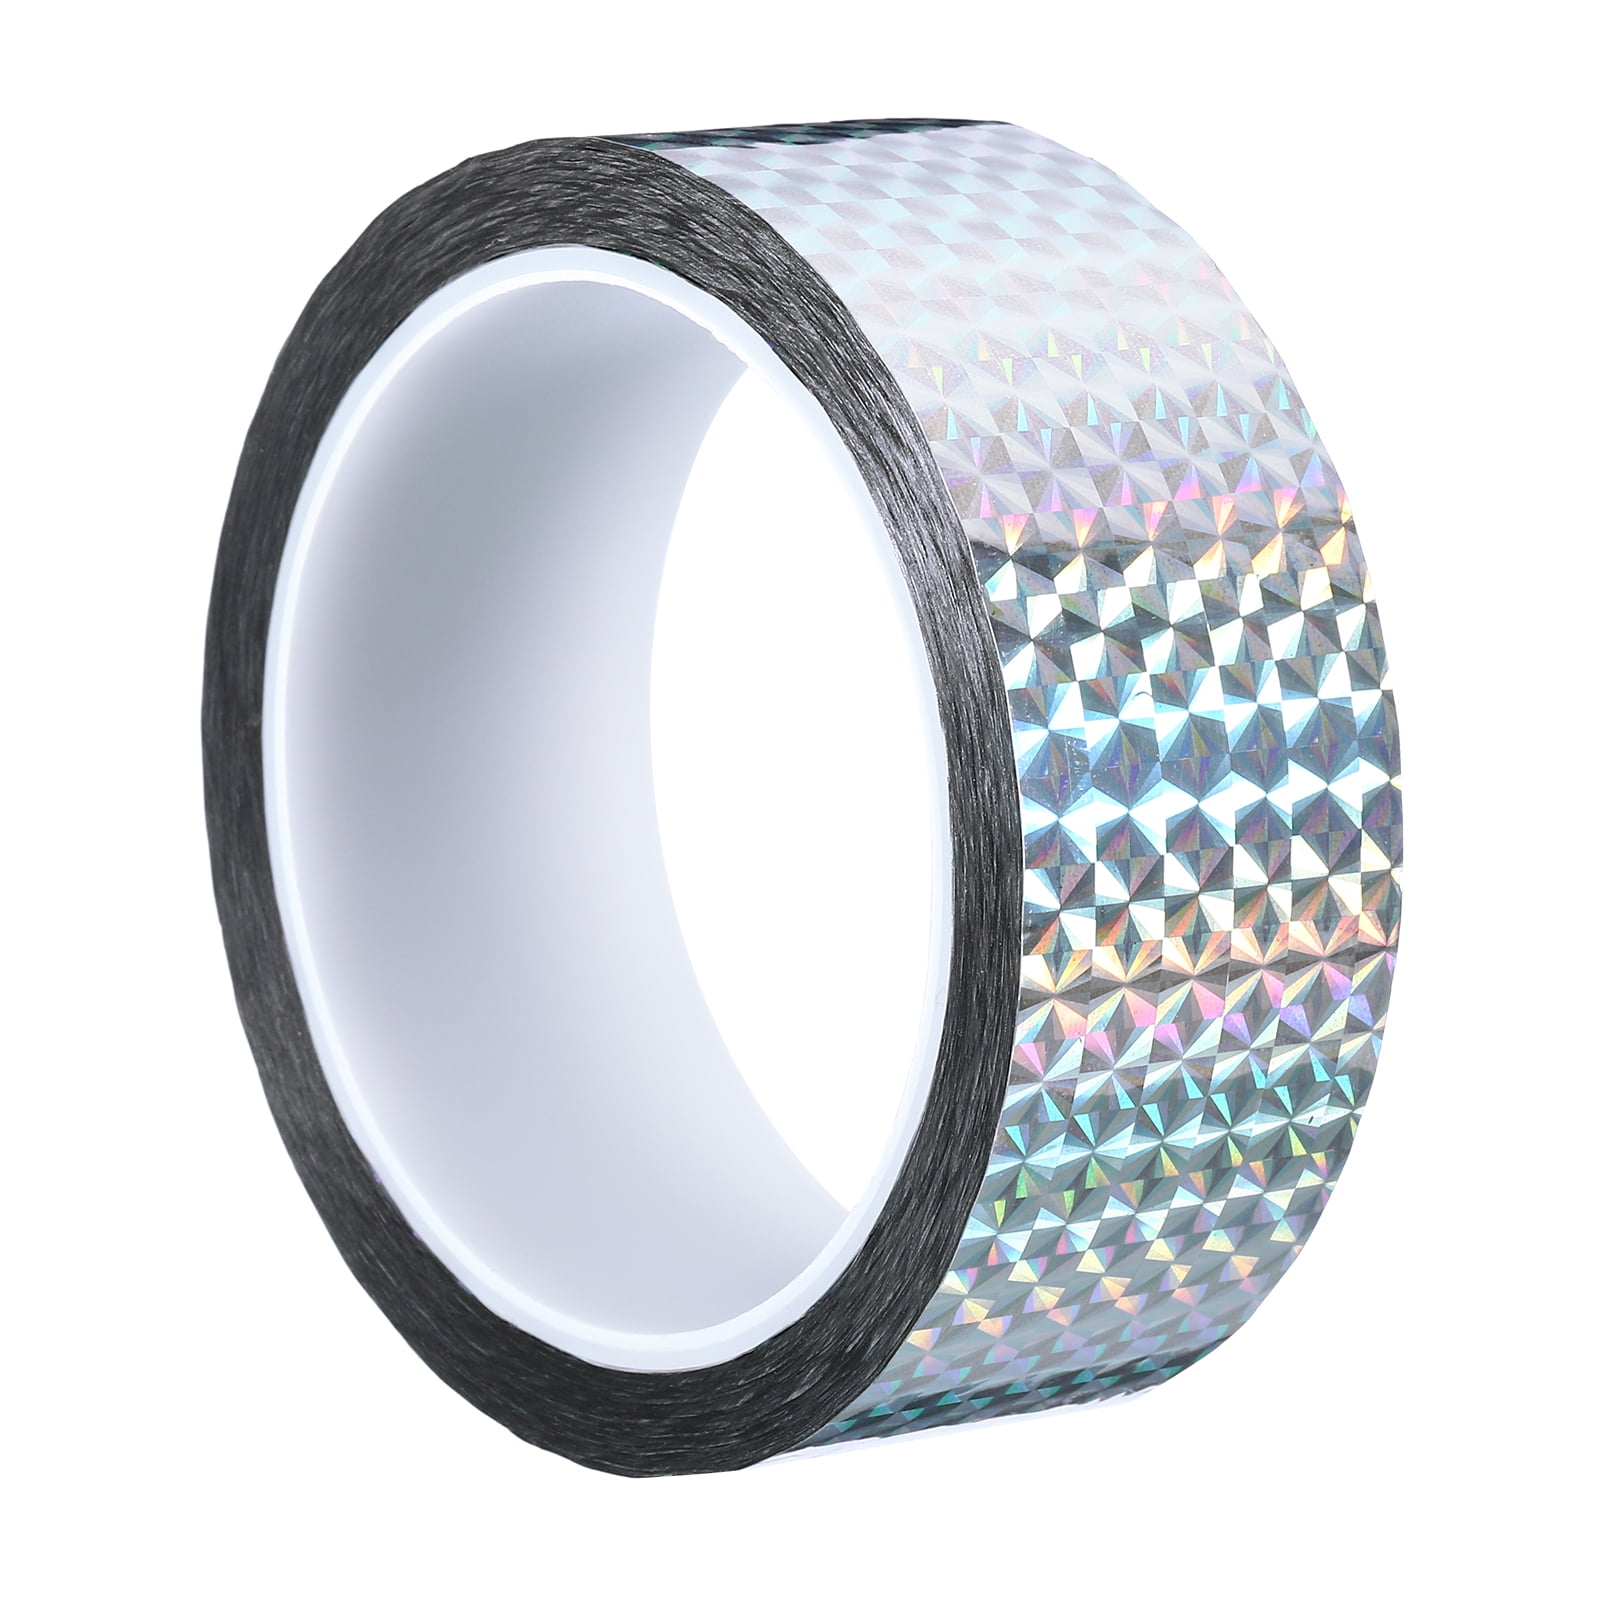 PATIKIL Prism Tape 1 Inch x 32.8 Yards, 12 Pack Holographic